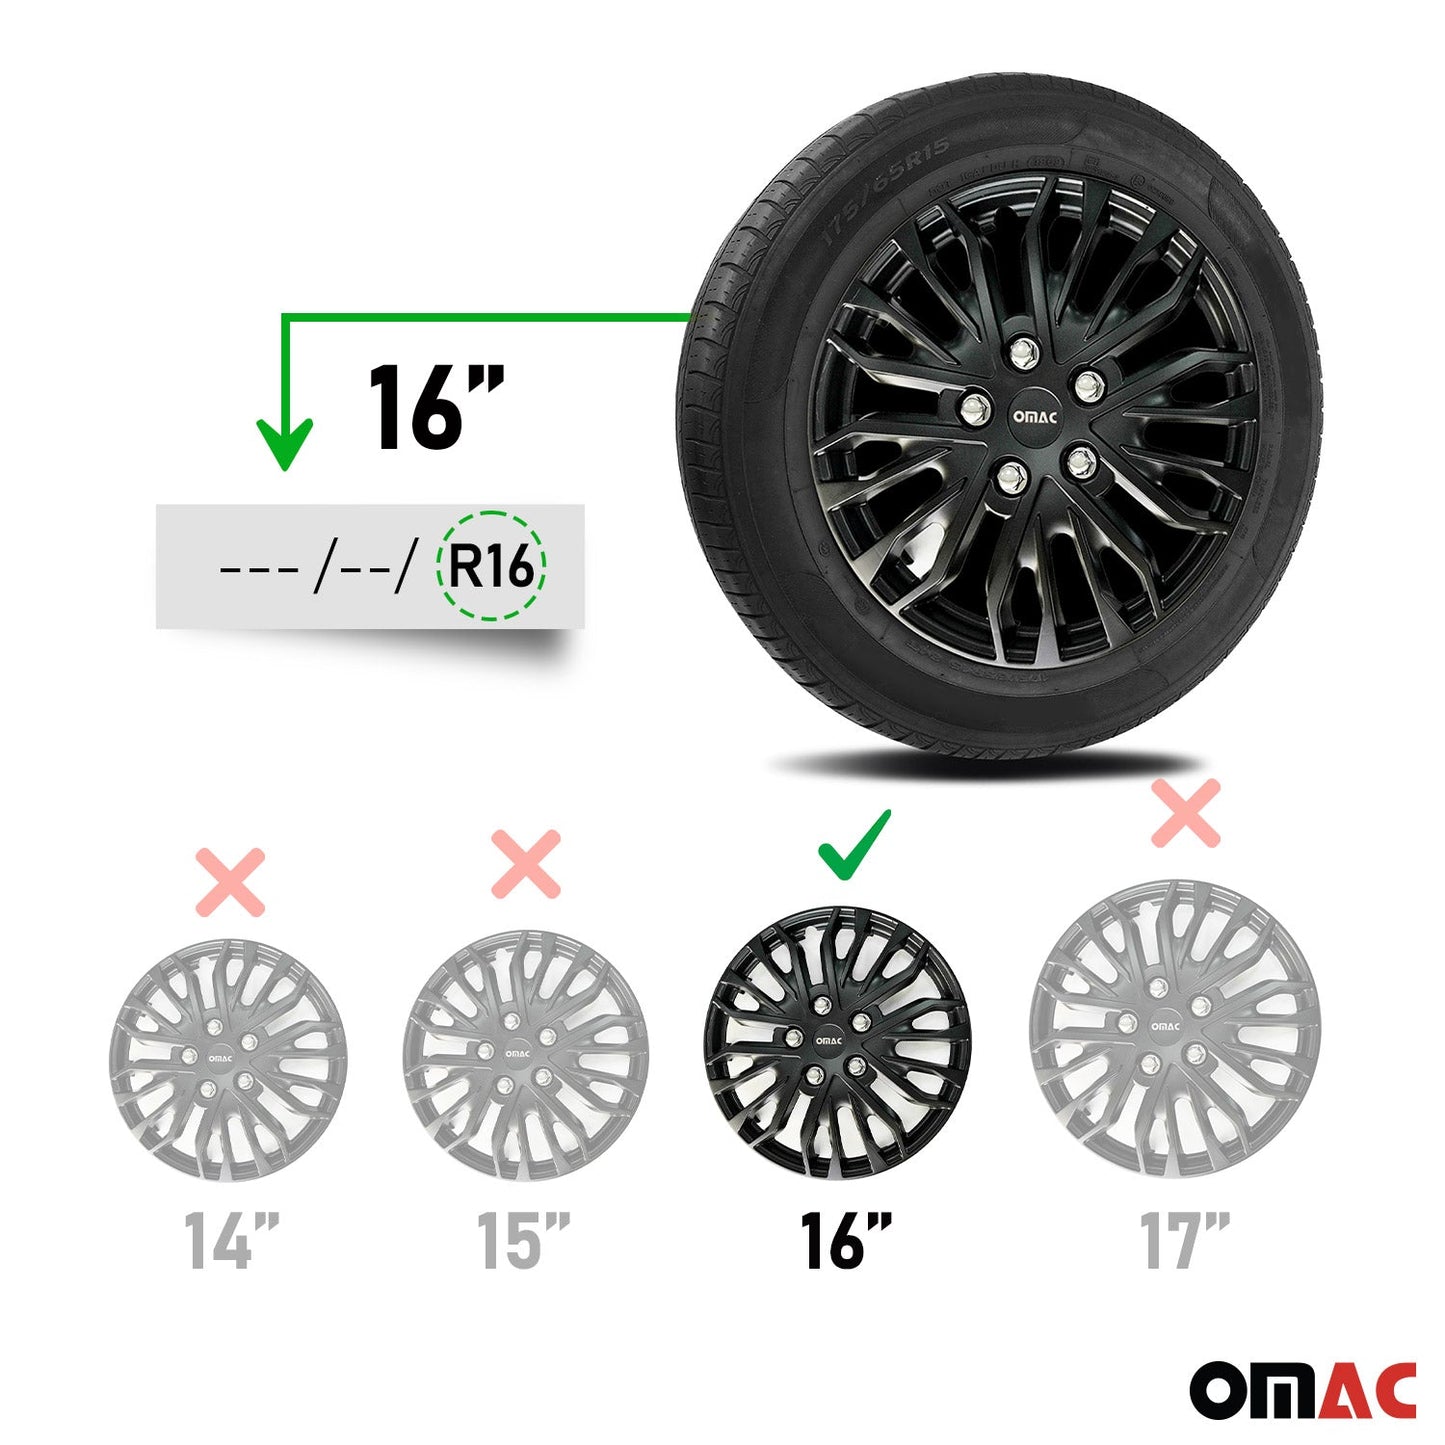 OMAC 16" Wheel Covers Guard Hub Caps Durable Snap On ABS Black Silver 4x OMAC-WE41-MBK16